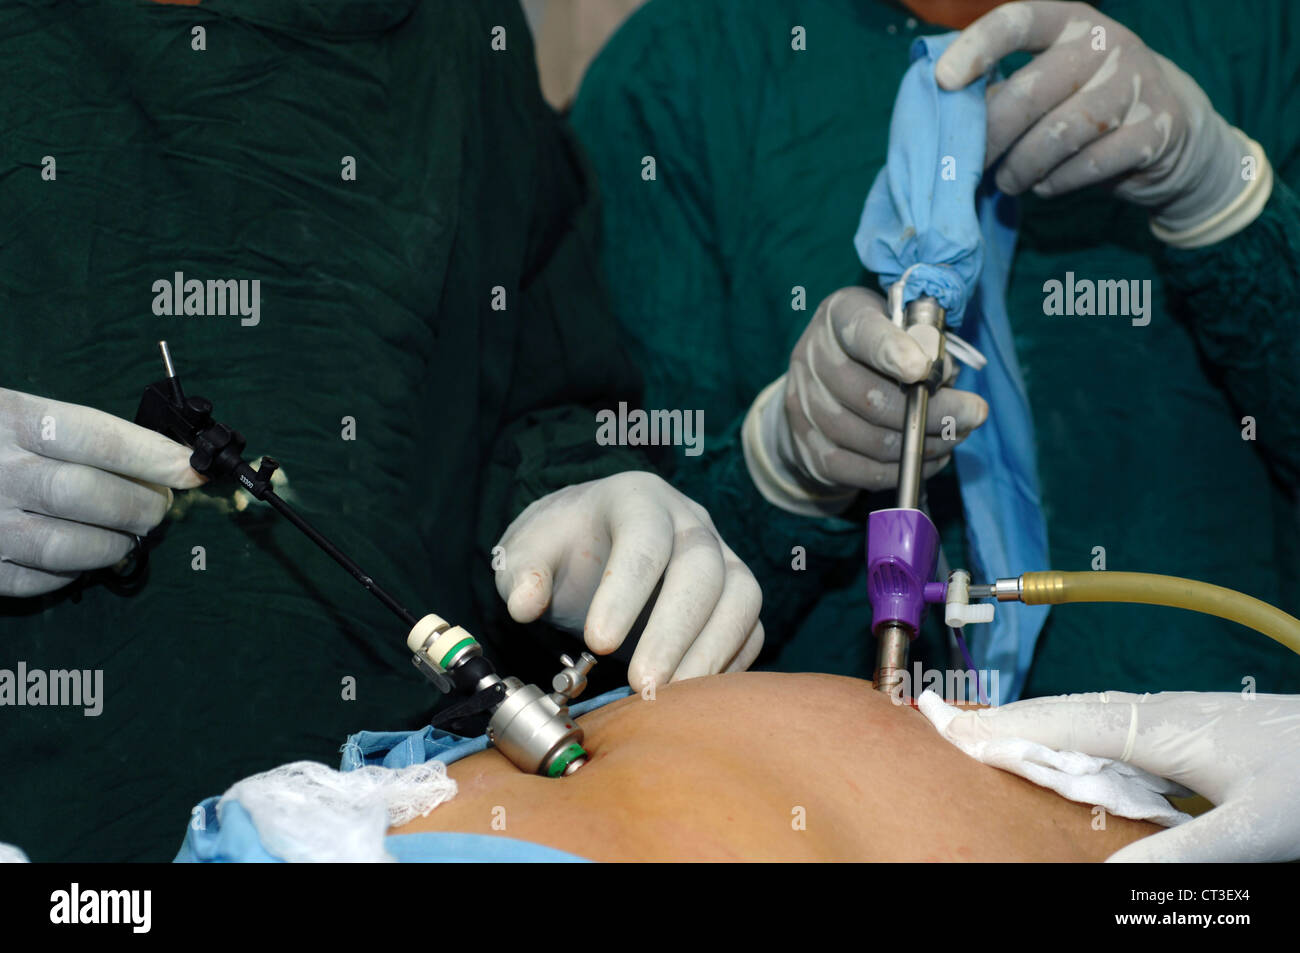 A surgeon (right) maneuveres a laparoscopic instrument into the abdominal cavity whist his assistant (left) operates the camera; providing the surgeon with a view of the inside of the abdomen. Stock Photo